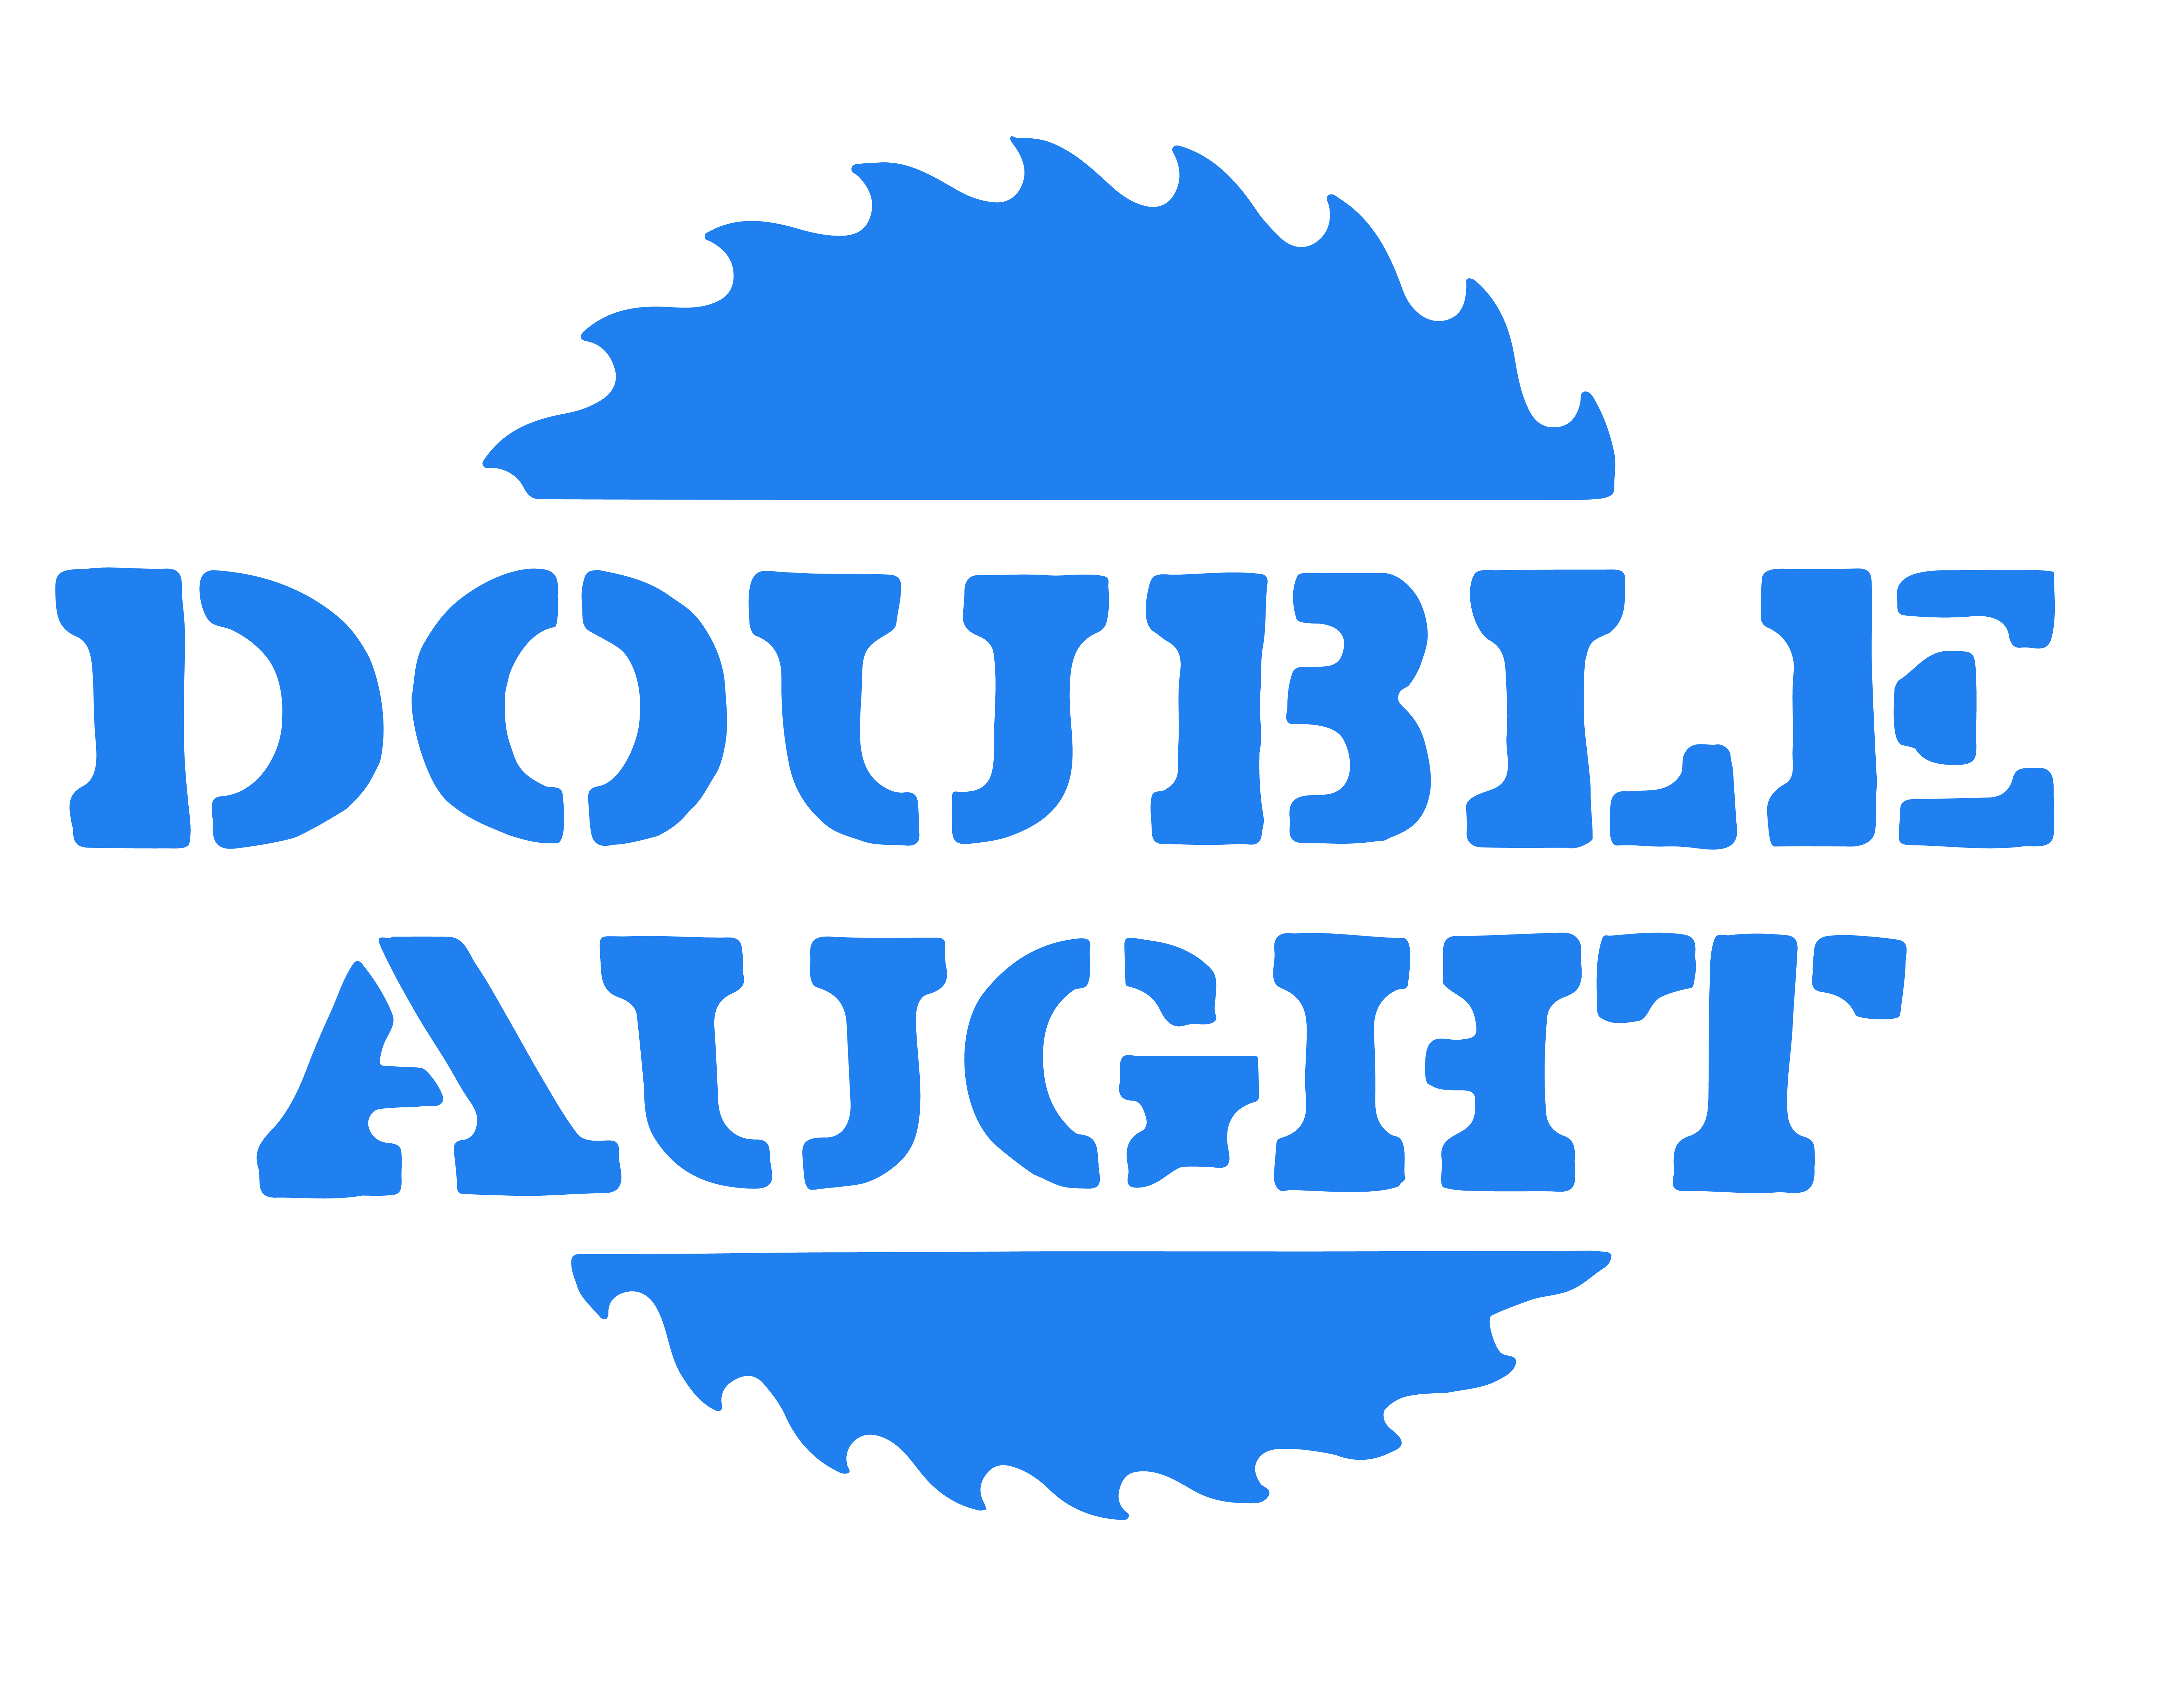 double aught logo